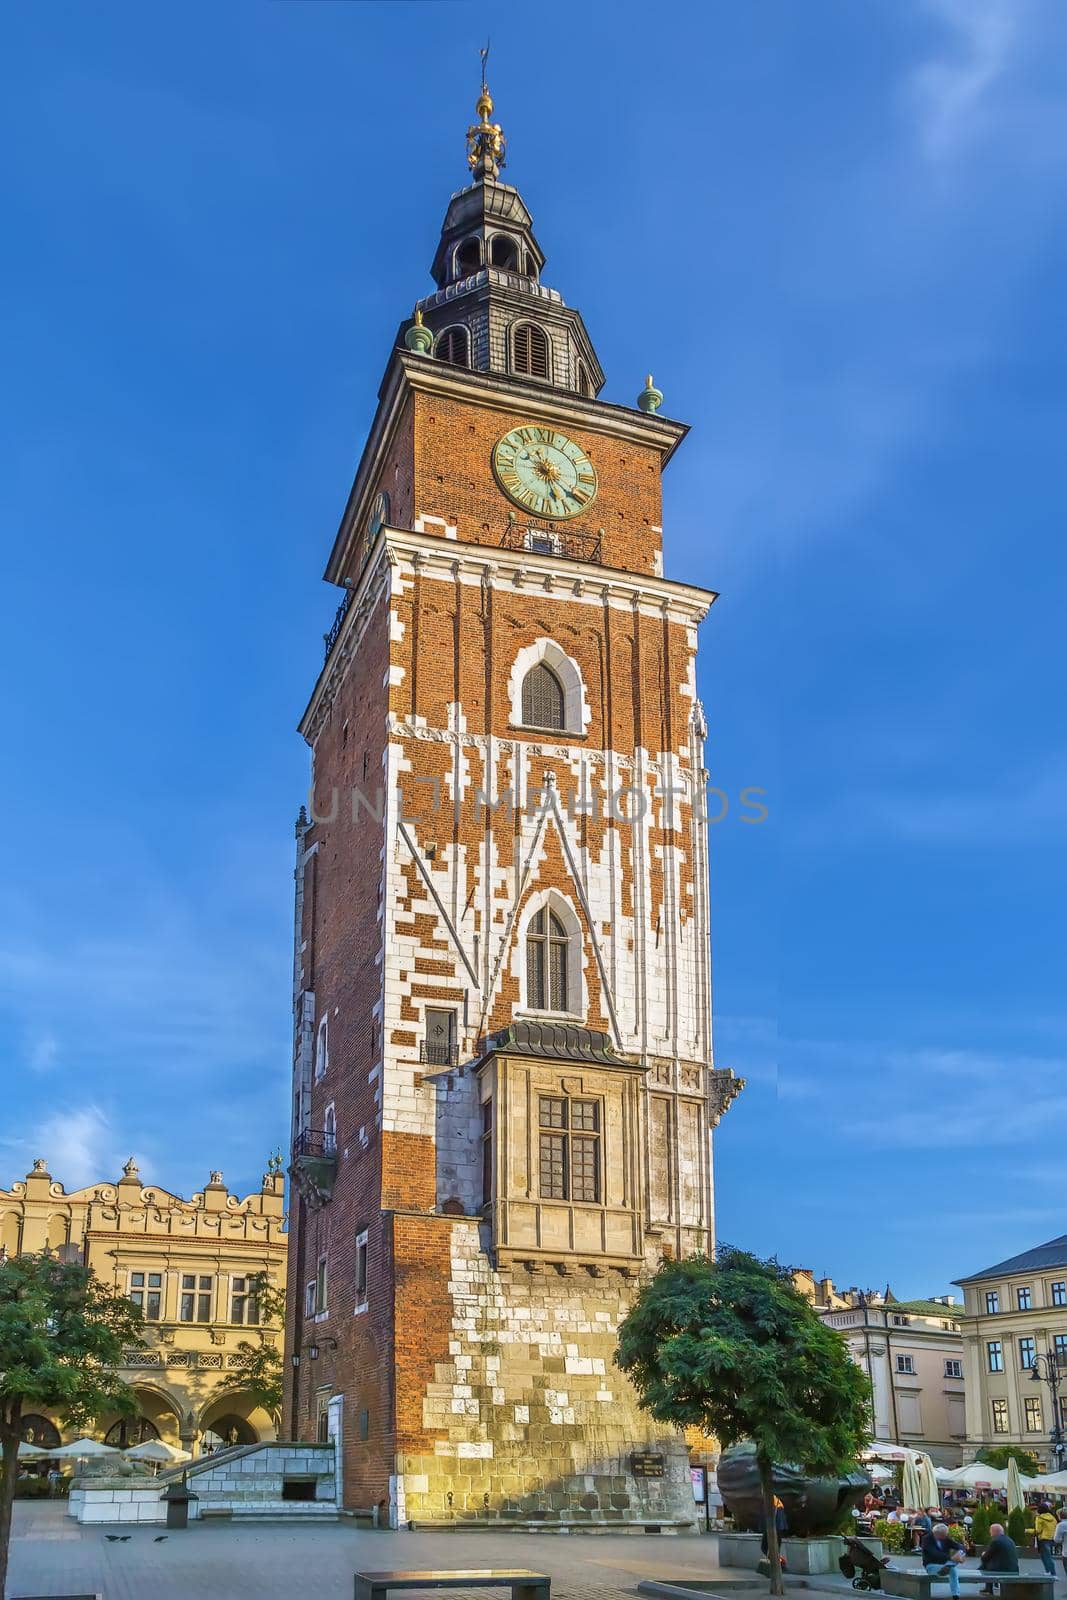 Town Hall Tower on Main market square in Krakow, Poland